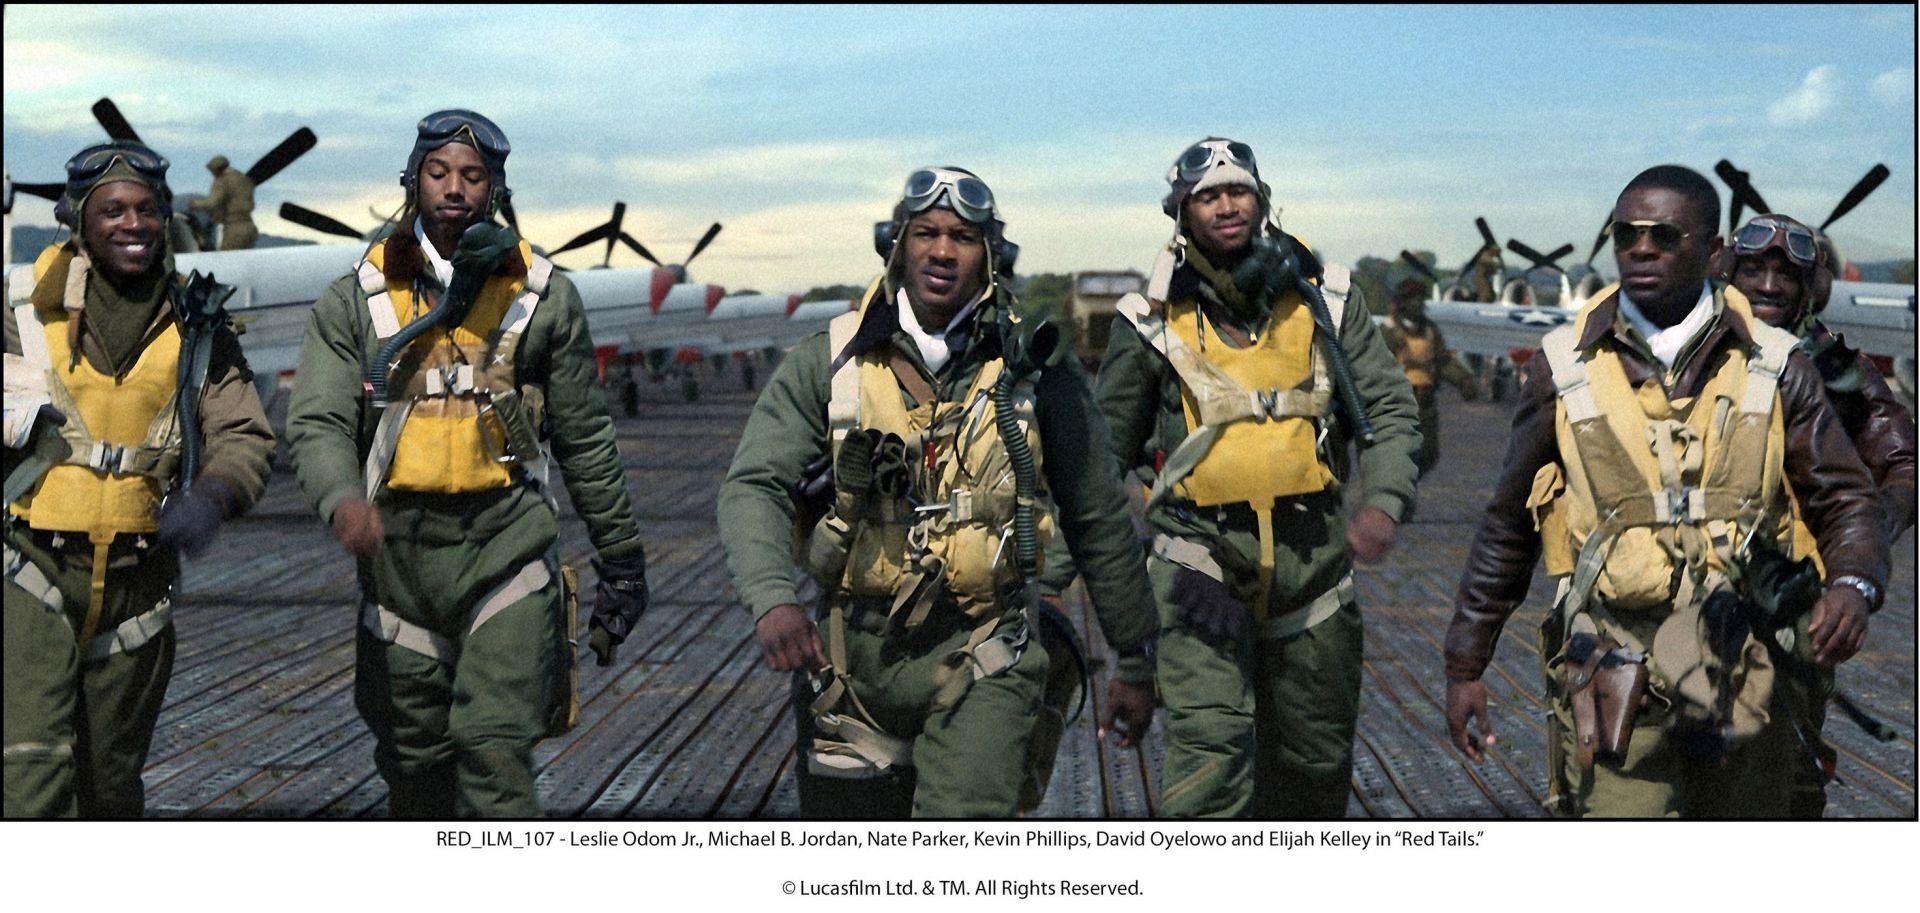 Michael B. Jordan, Nate Parker, Kevin Phillips, David Oyelowo and Elijah Kelley in The 20th Century Fox's Red Tails (2012)